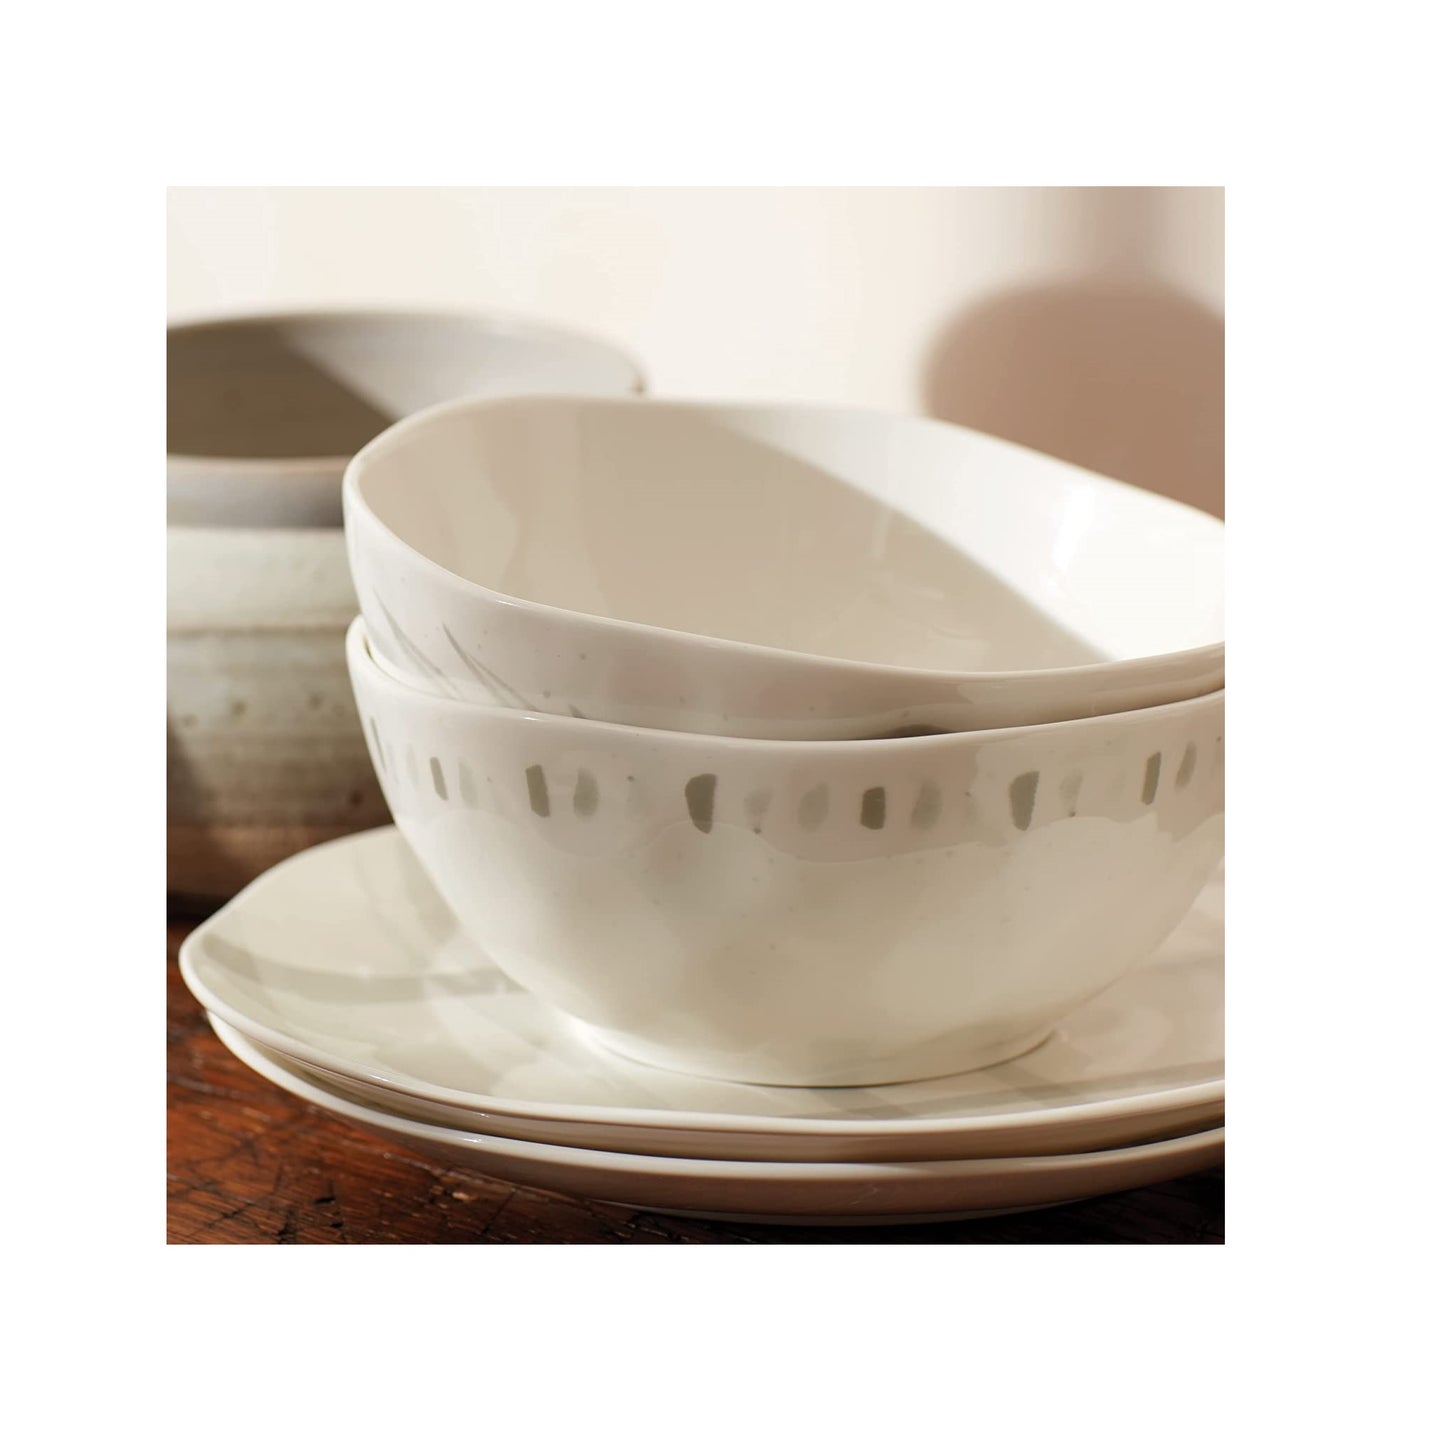 Oyster Bay Assorted All-Purpose Bowls, Set of 4 by Lenox